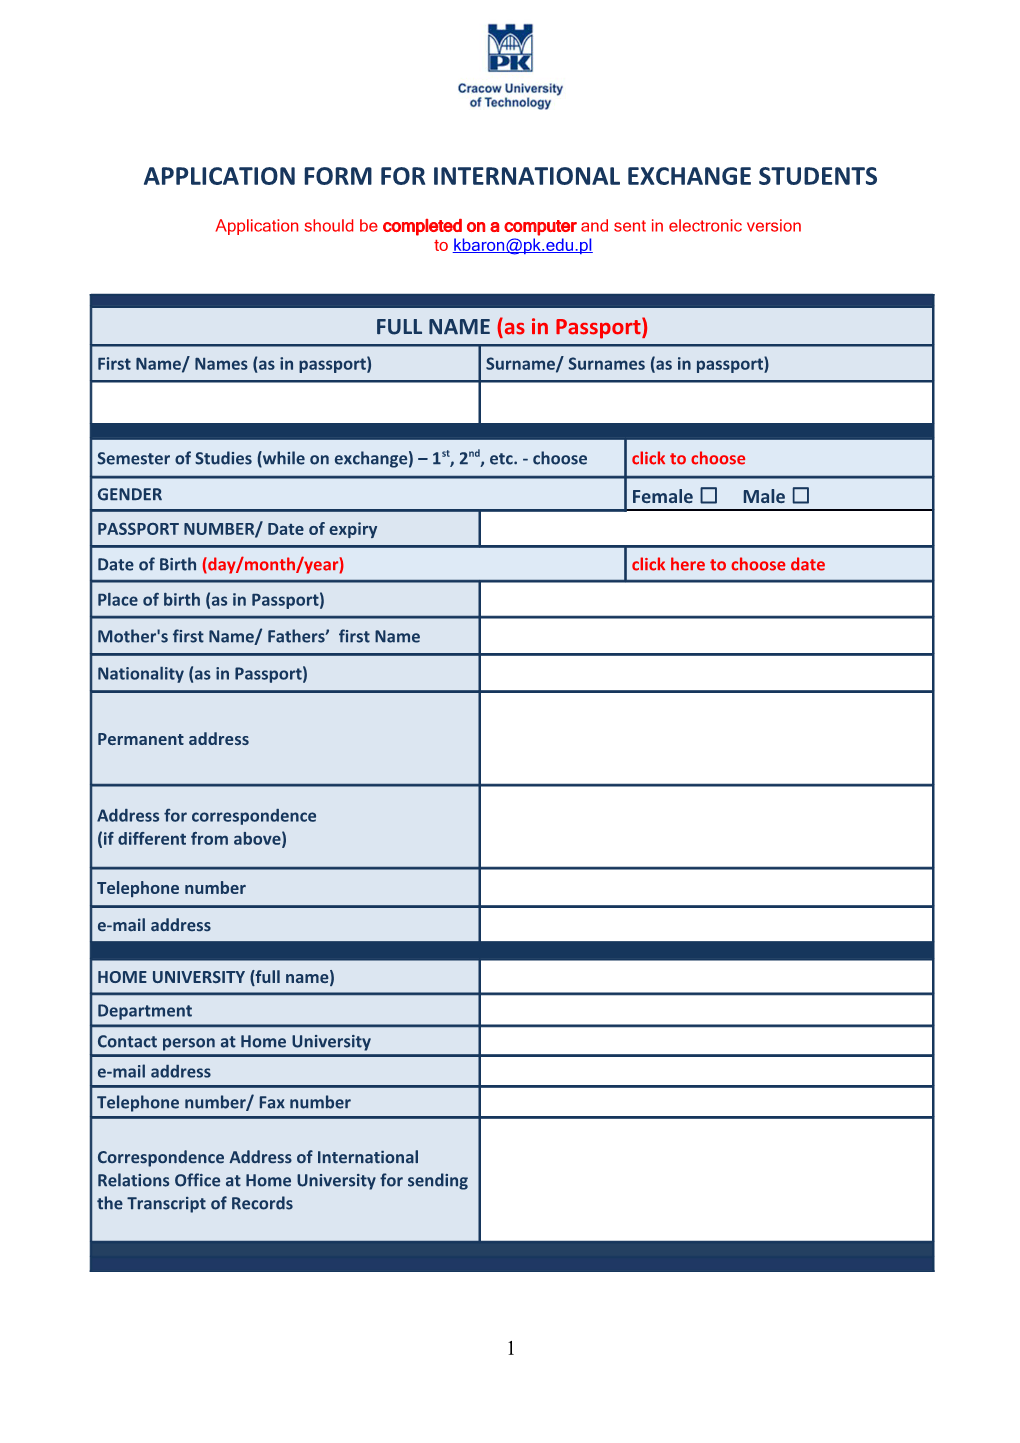 Application Form for International Exchange Students